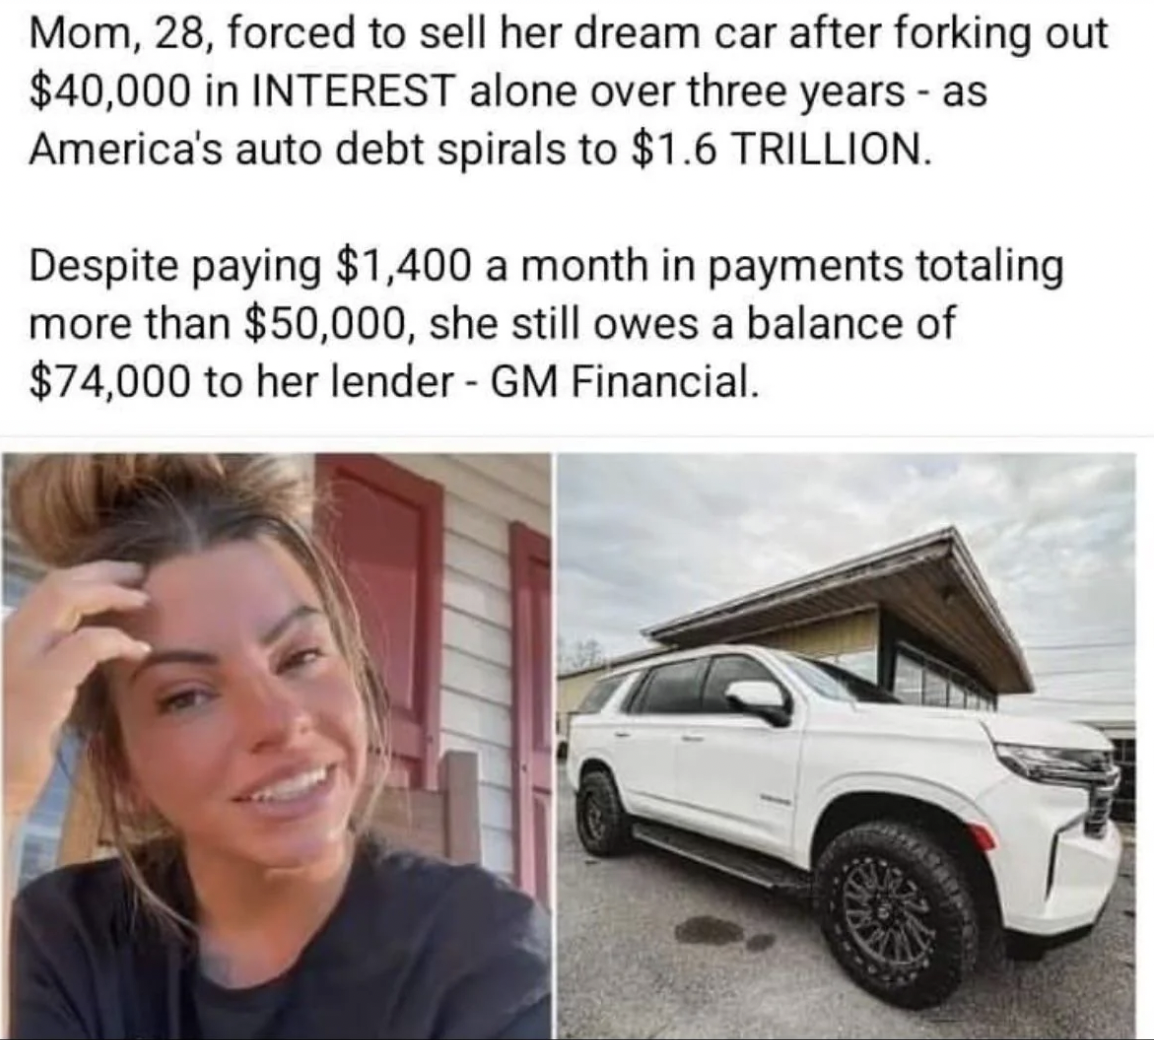 Car - Mom, 28, forced to sell her dream car after forking out $40,000 in Interest alone over three years as America's auto debt spirals to $1.6 Trillion. Despite paying $1,400 a month in payments totaling more than $50,000, she still owes a balance of $74